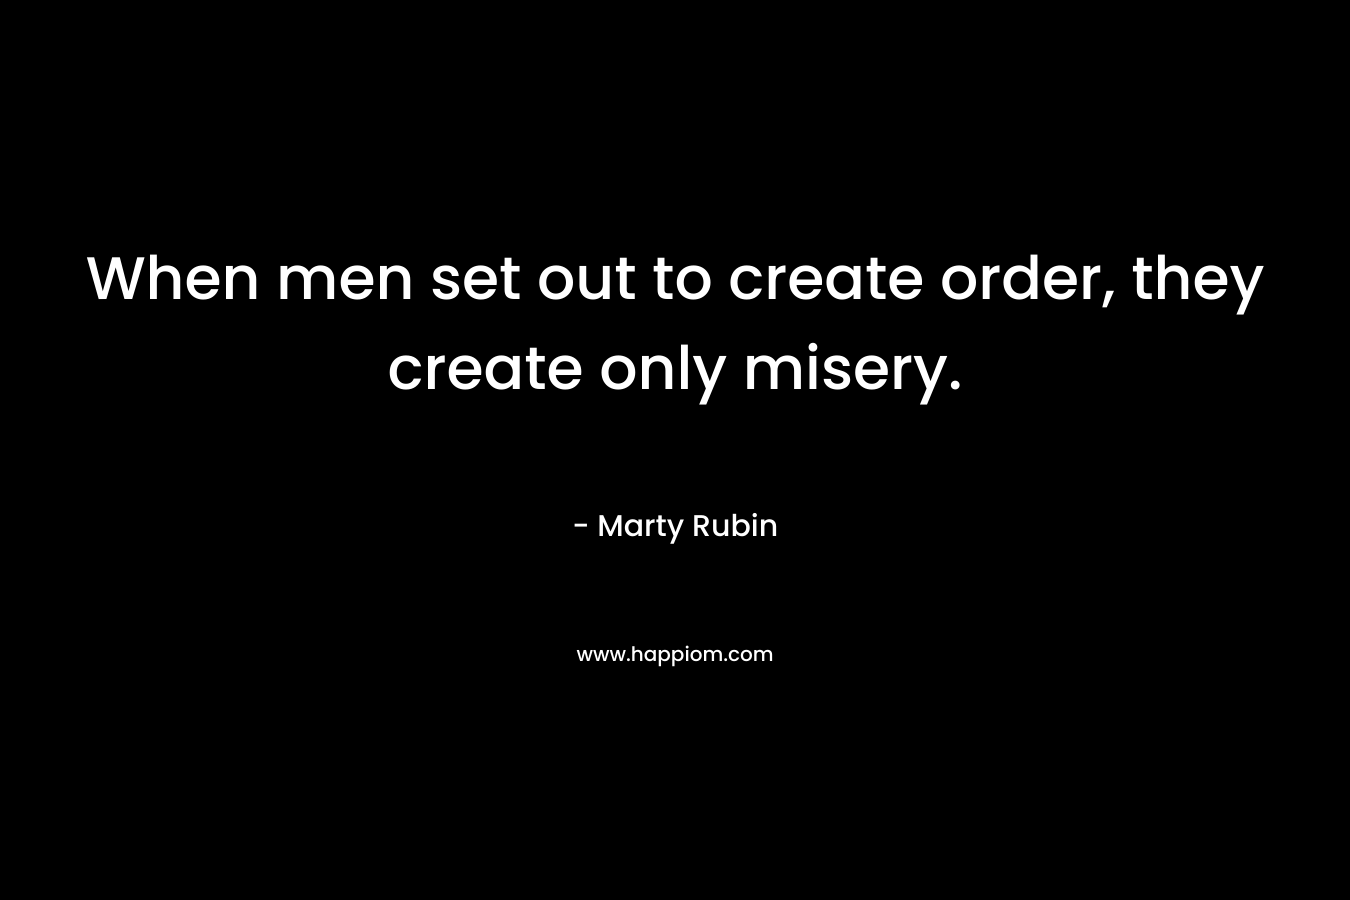 When men set out to create order, they create only misery.